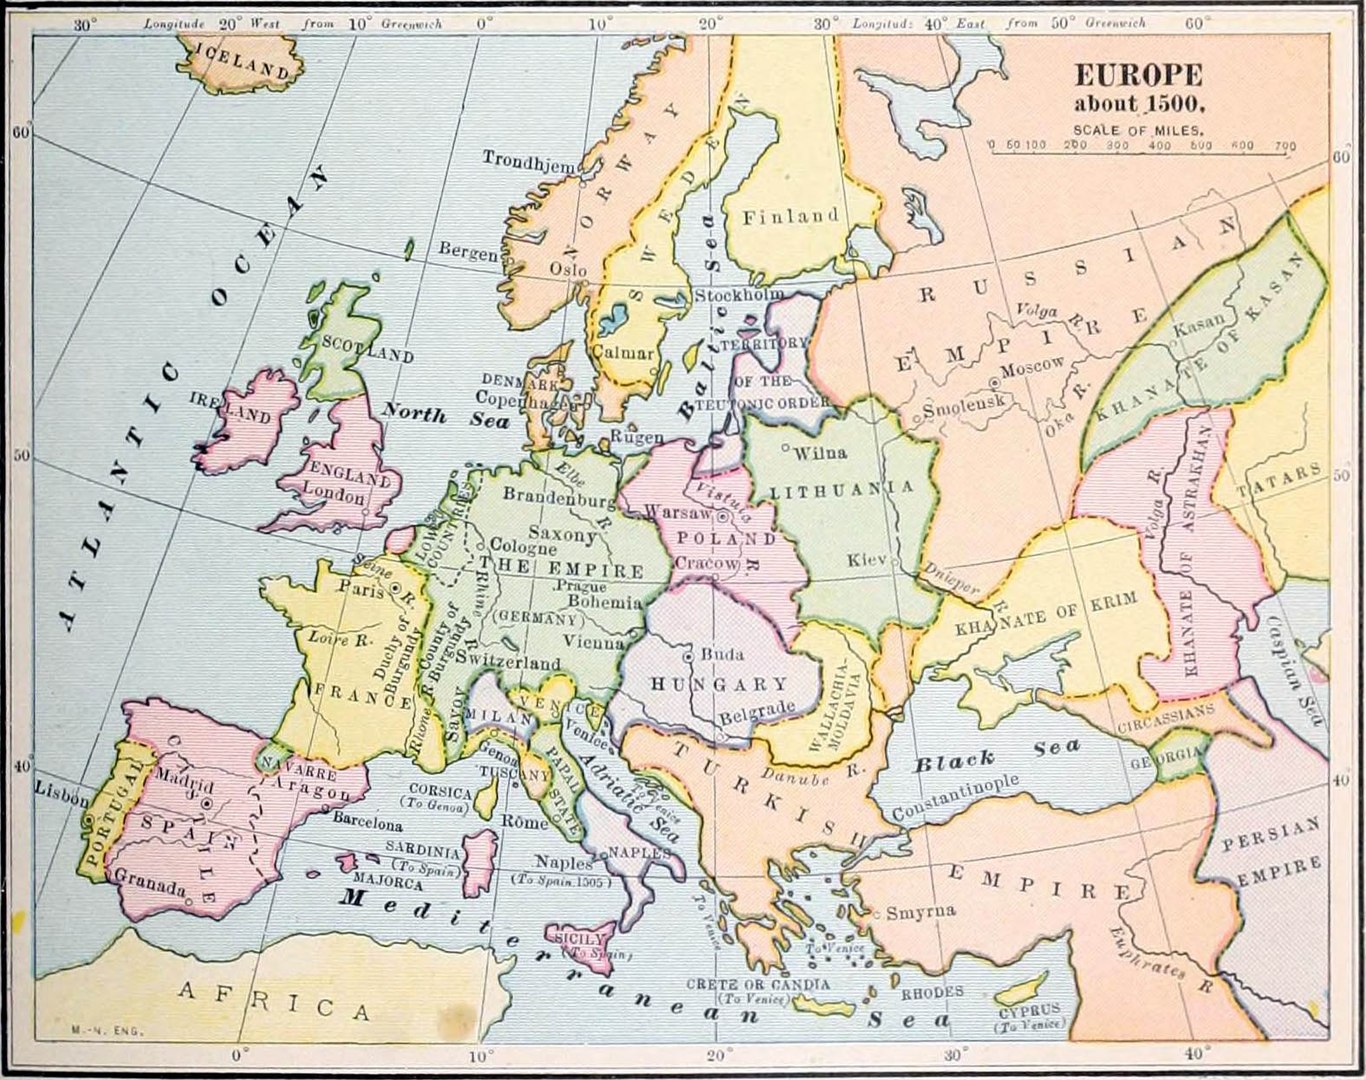 Map of Europe in 1500 showing the major national boundaries of the time